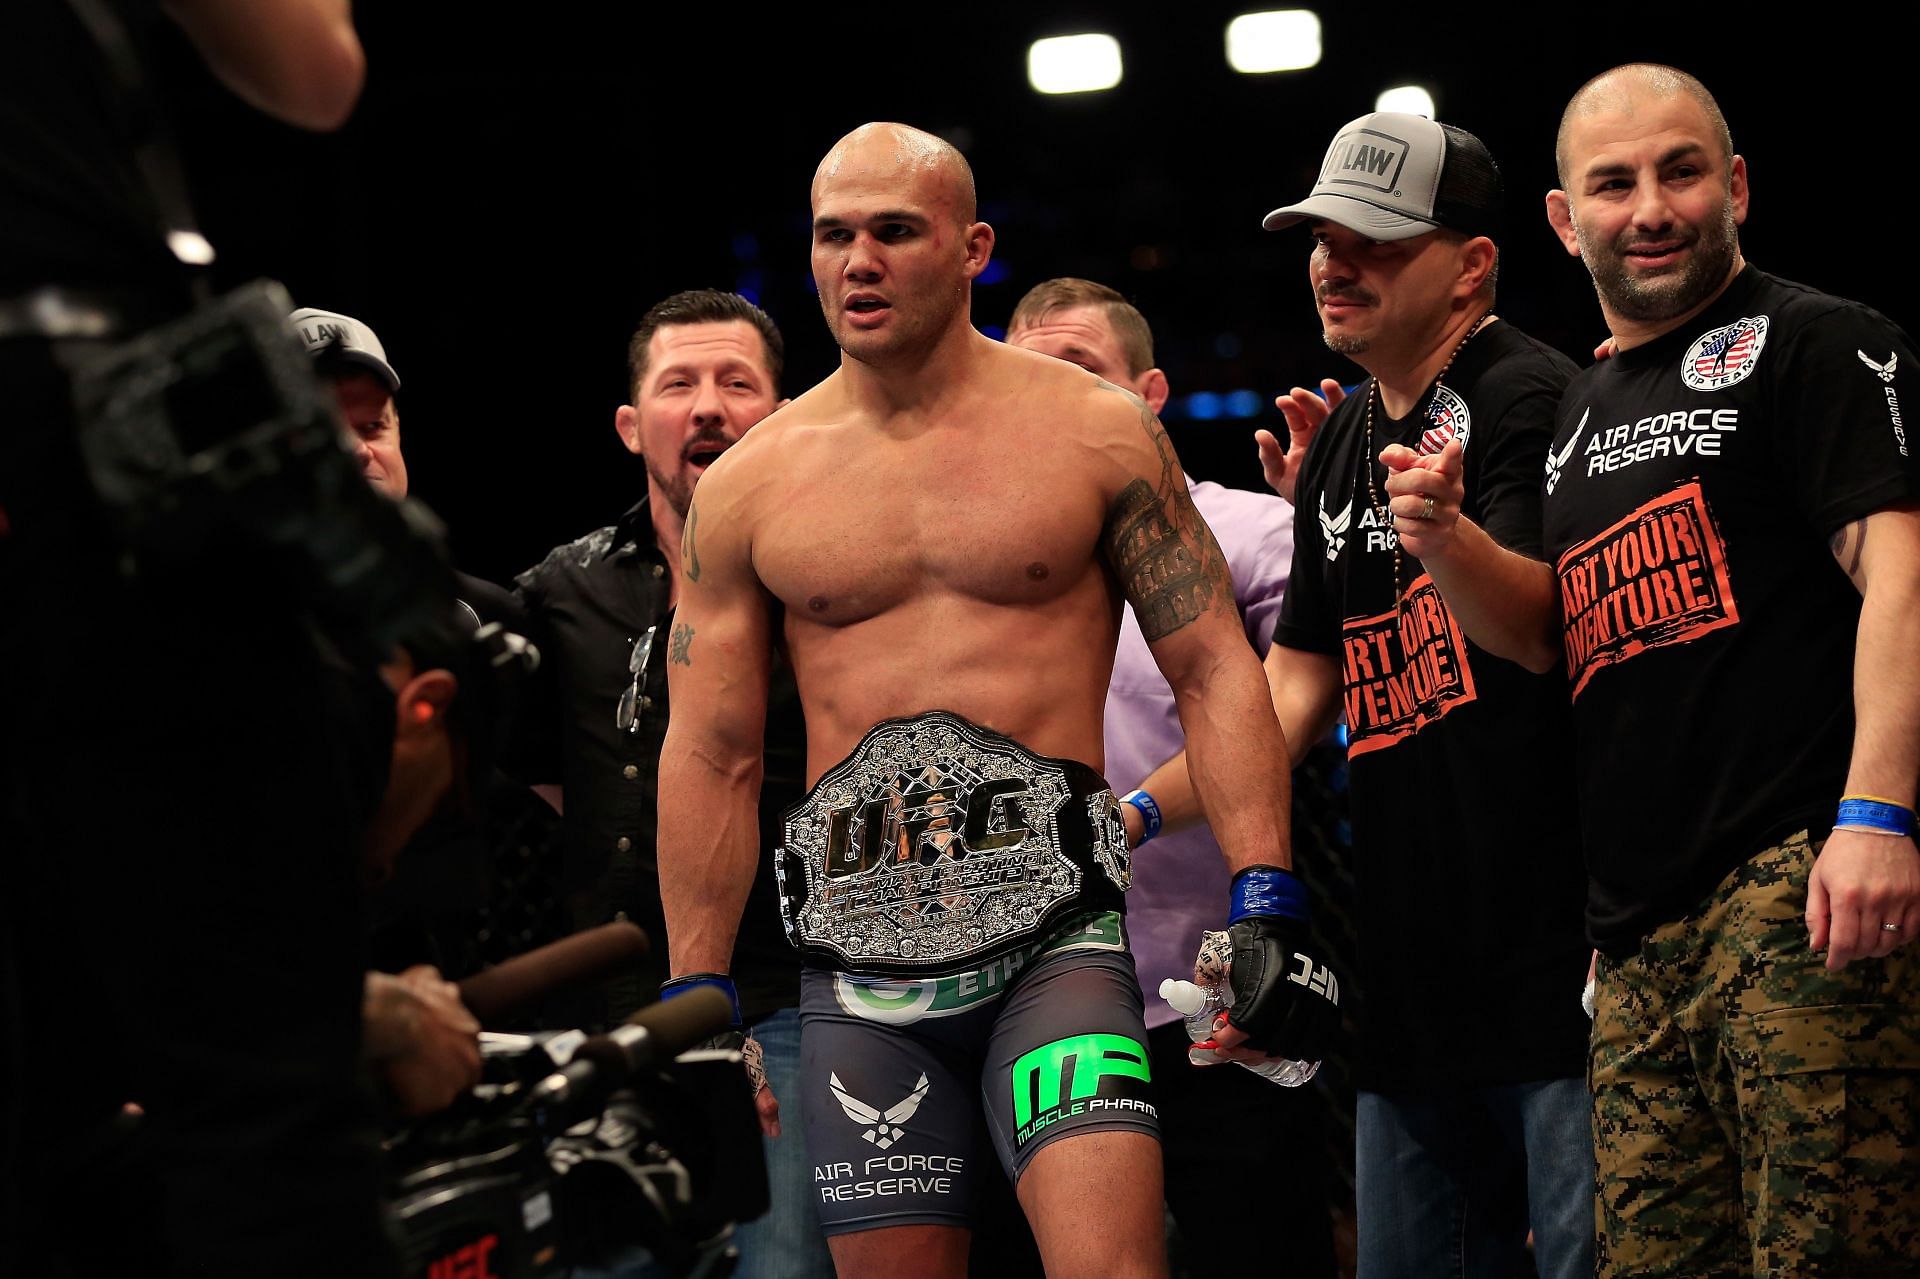 Once a champion, Robbie Lawler has now fallen on hard times